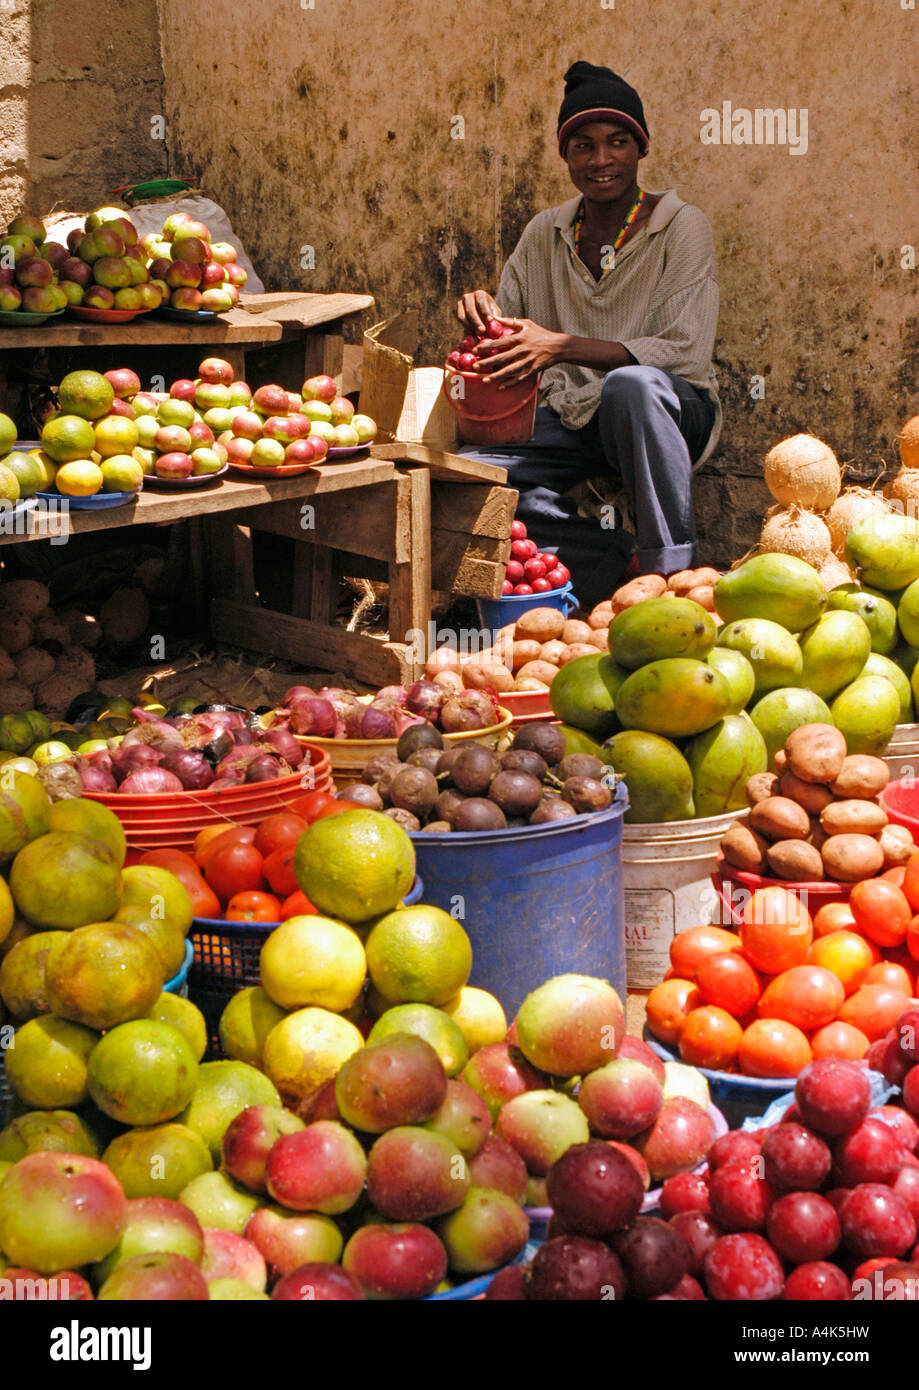 Man selling tropical fruits in a bus station, Mombo, Tanzania Stock Photo